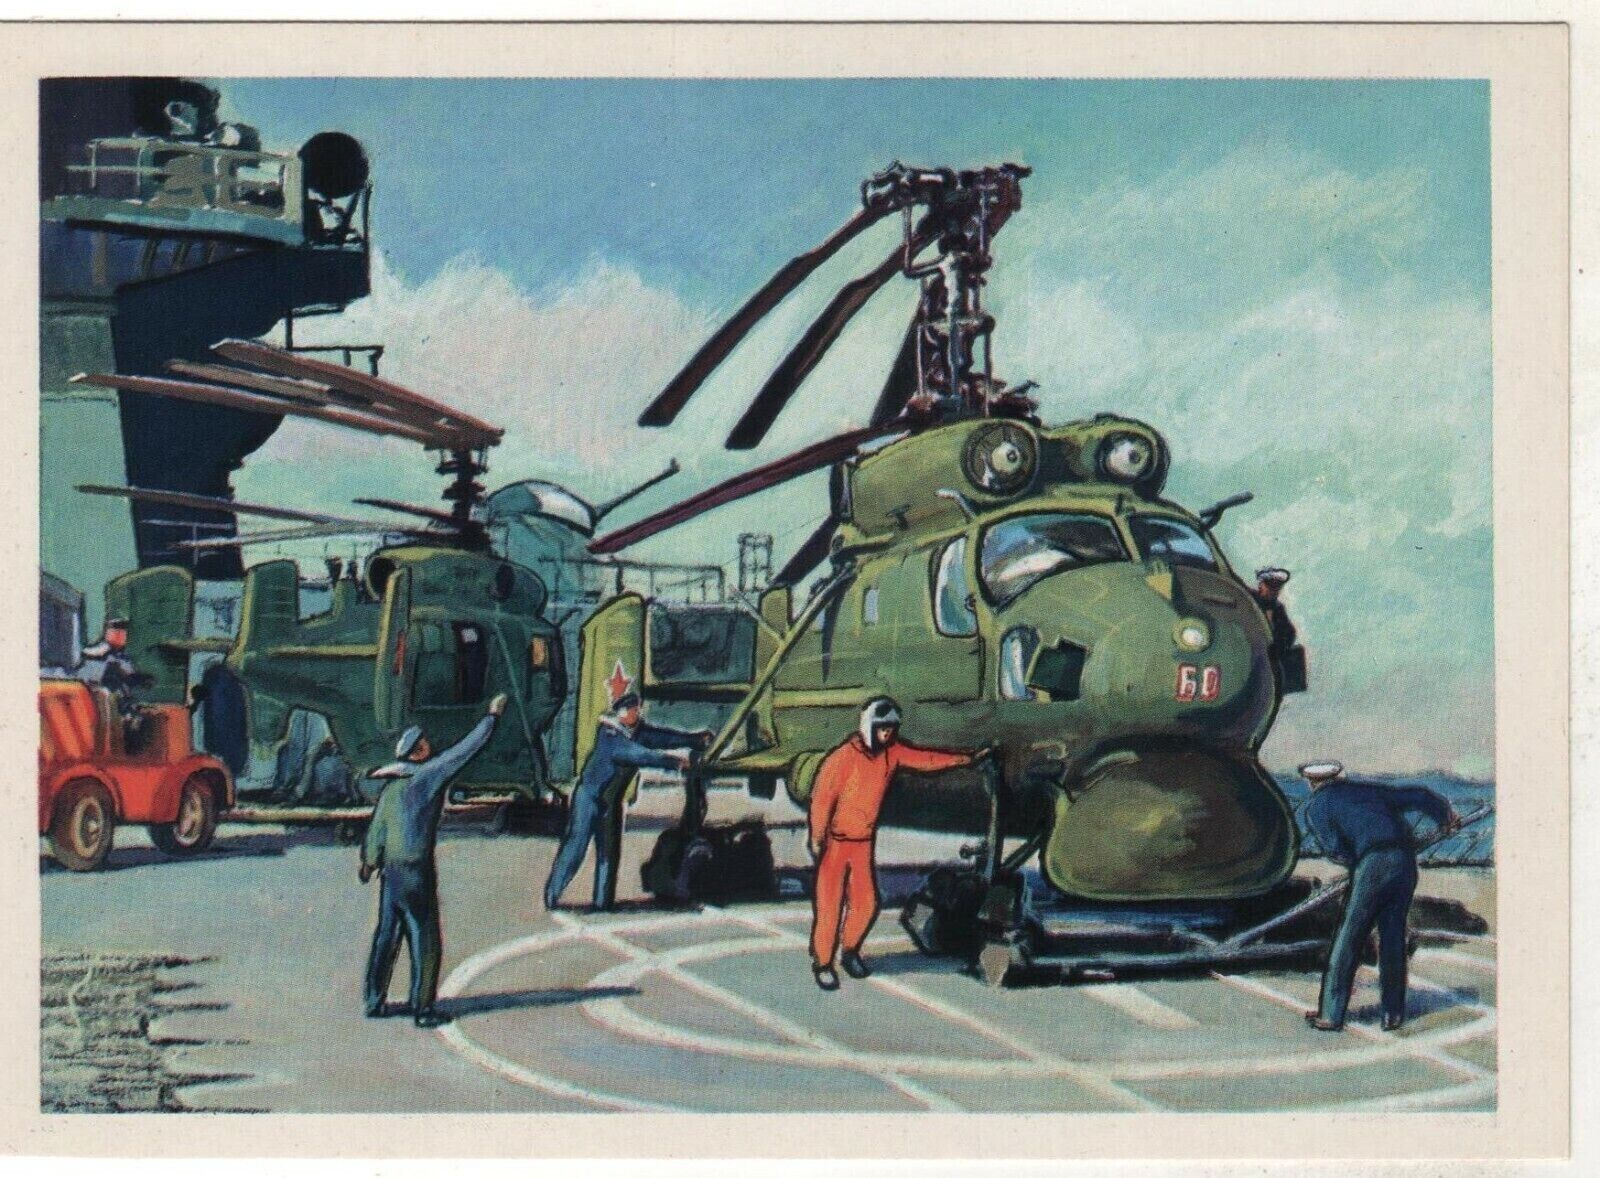 1973 Anti-submarine HELICOPTER AVIATION Pilots AVIA Russia Postcard Old